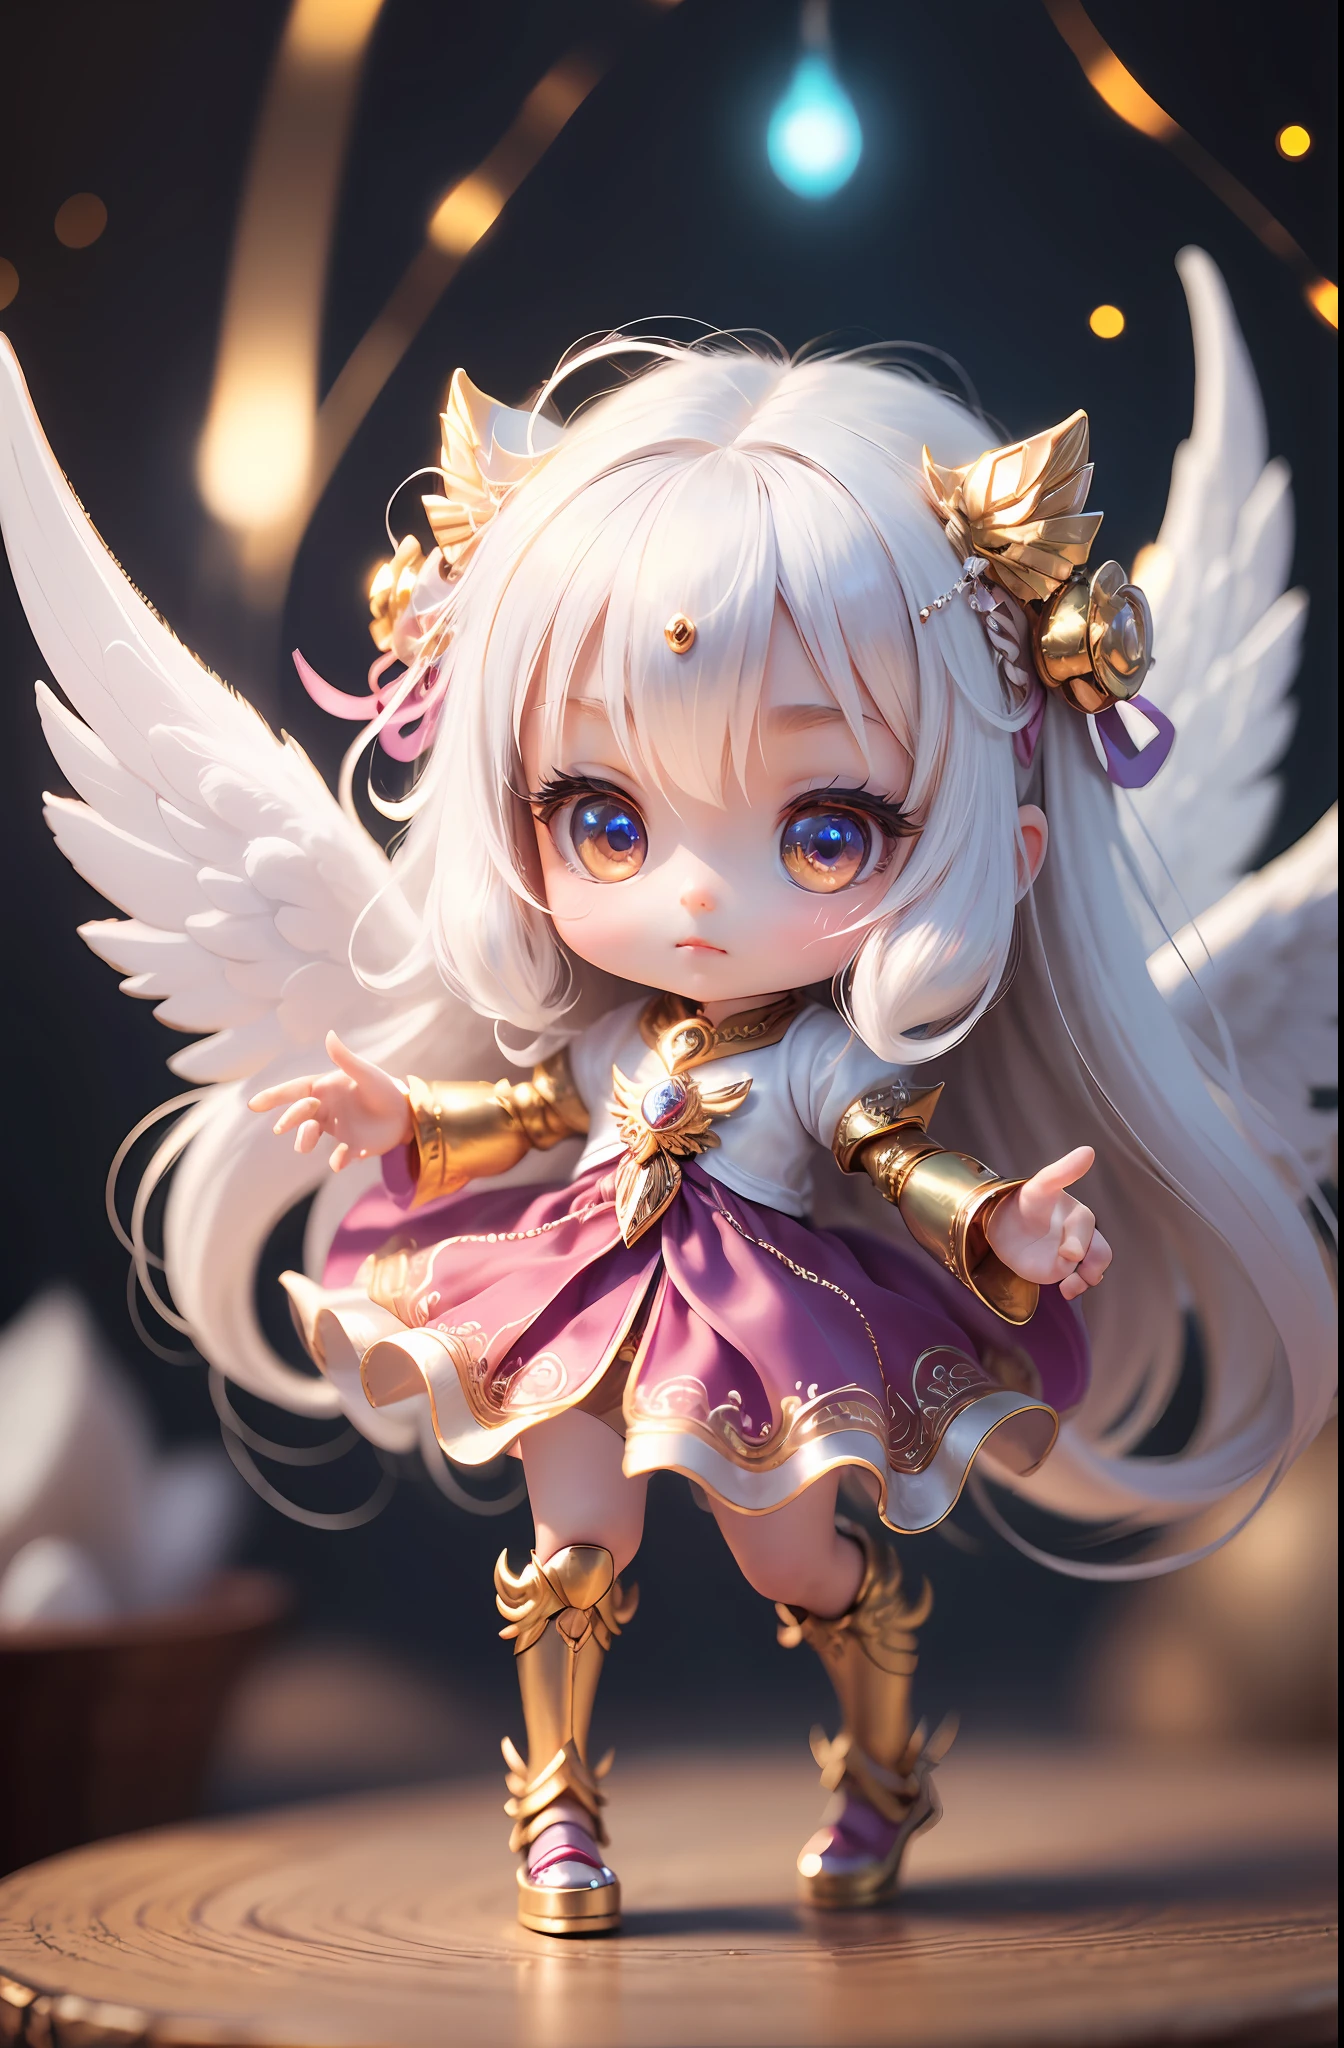 (Chibi: 1.2), (Masterpiece: 1.4), (Best Quality: 1.4), (Very Cute Angel Girl, Super Detailed Face, Jewel-like Eyes, White Very Long Hair, Colorful Gradient Hair: 1.4), (Angel Ring:
1.4), (Angel Wings: 1.4), (Full body, perfect 2 arms, perfect 2 legs: 1.4), (Perfect 4 fingers: 1 thumb), light, shine, bokeh, super fine